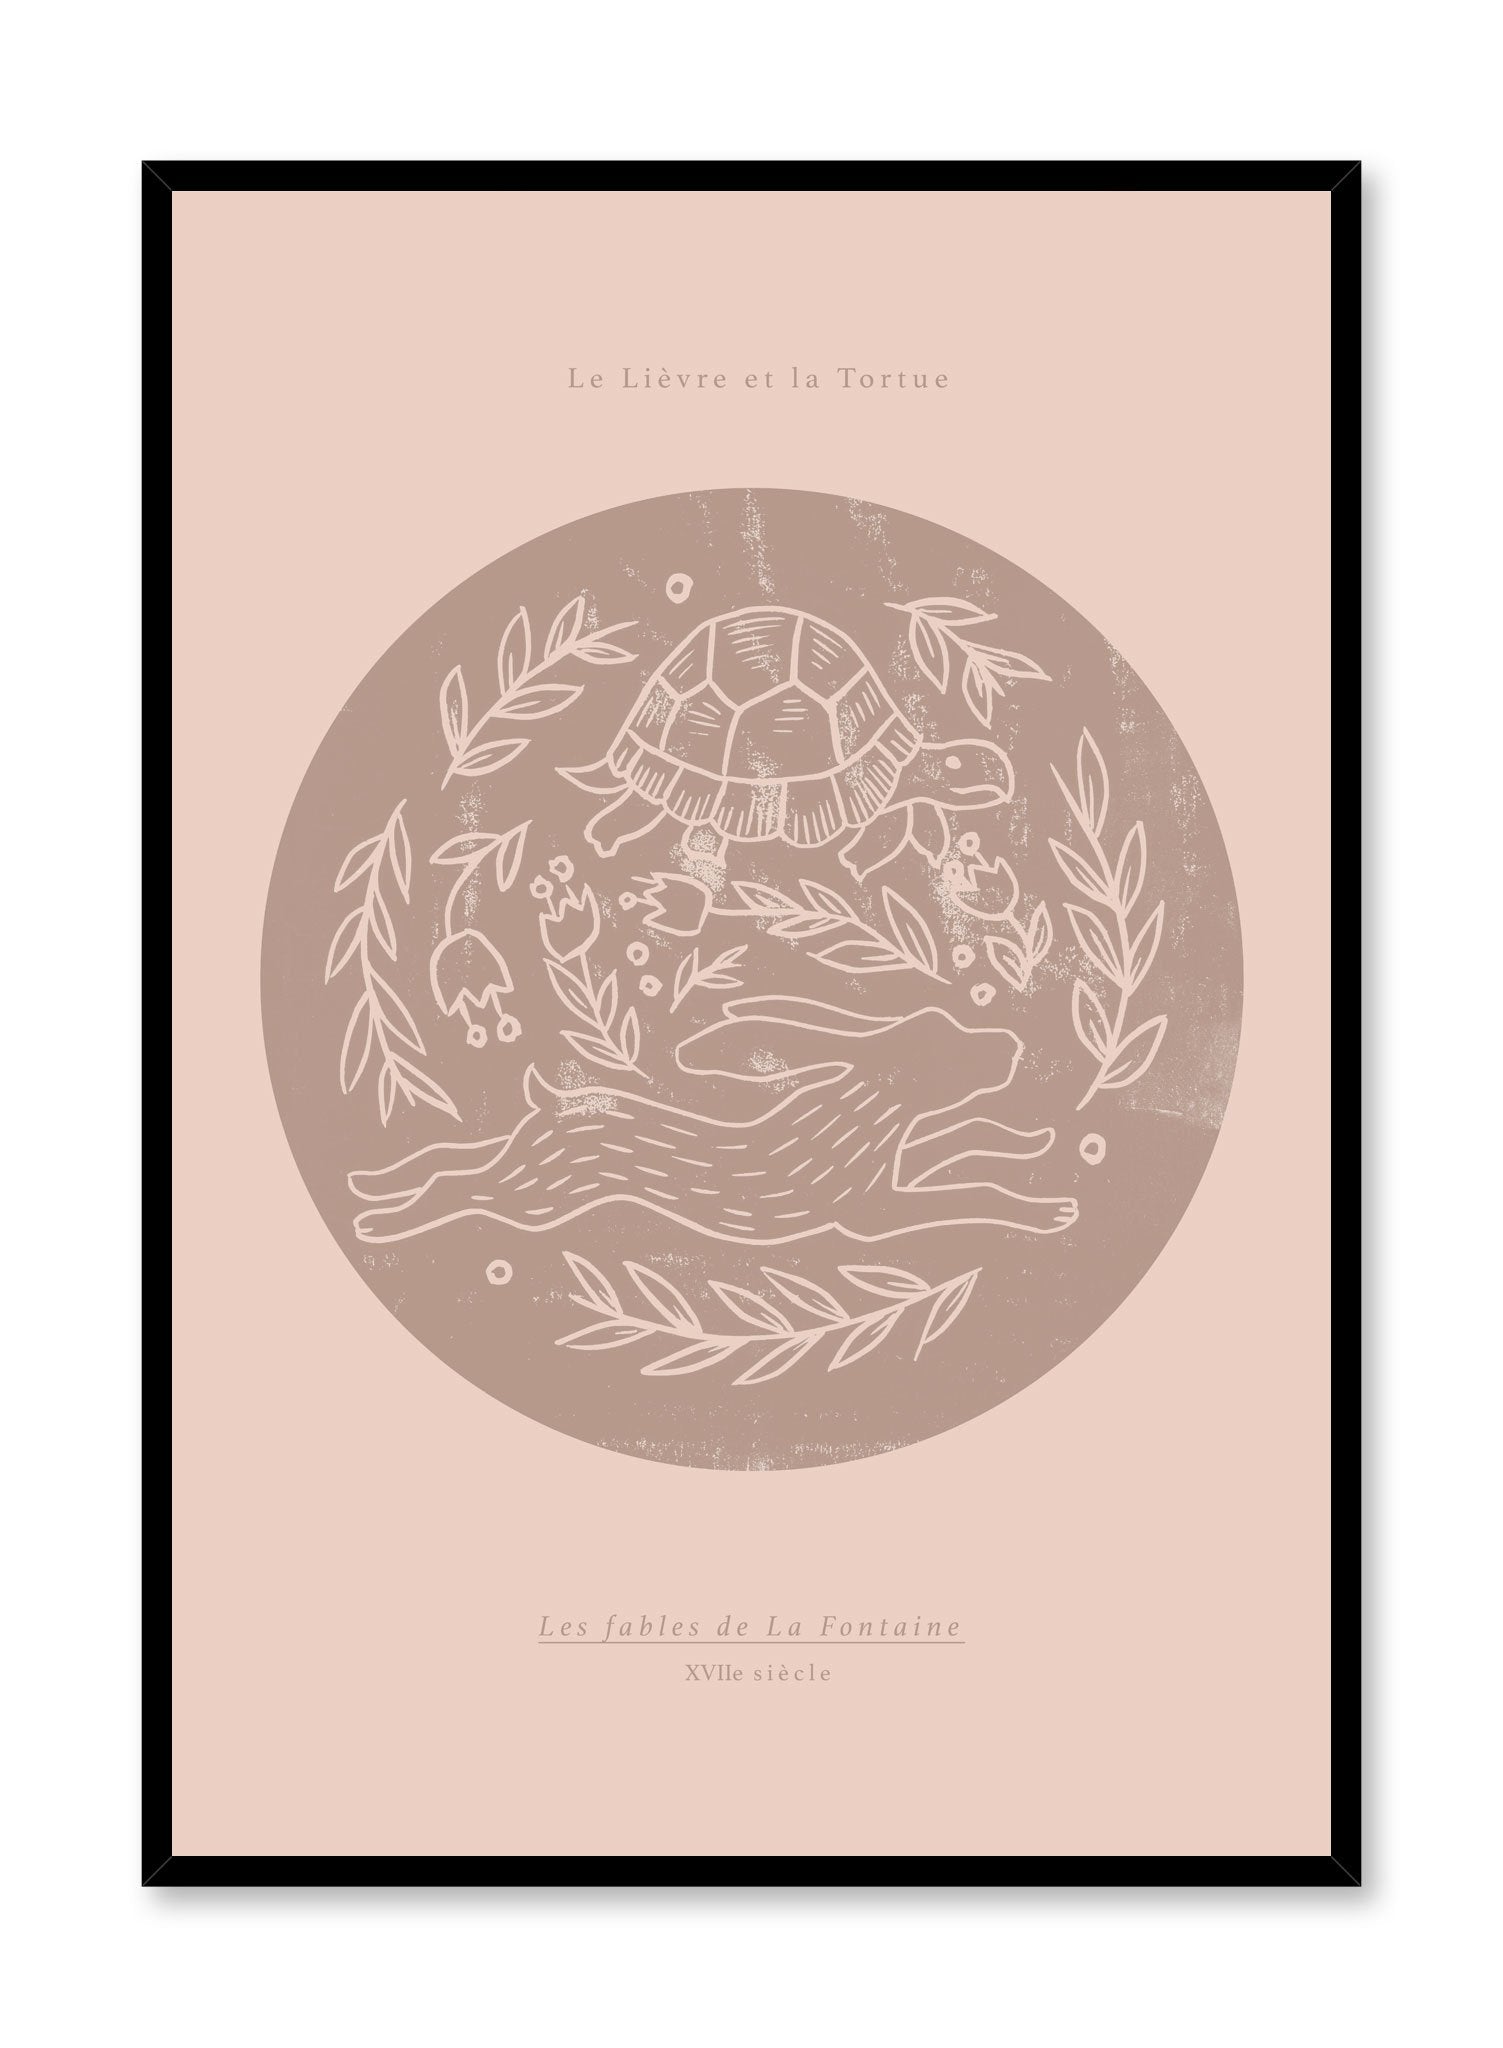 The Hare & the Tortoise is a minimalist illustration by Opposite Wall of La Fontaine's The Hare & the Tortoise where both animals are racing against each other.